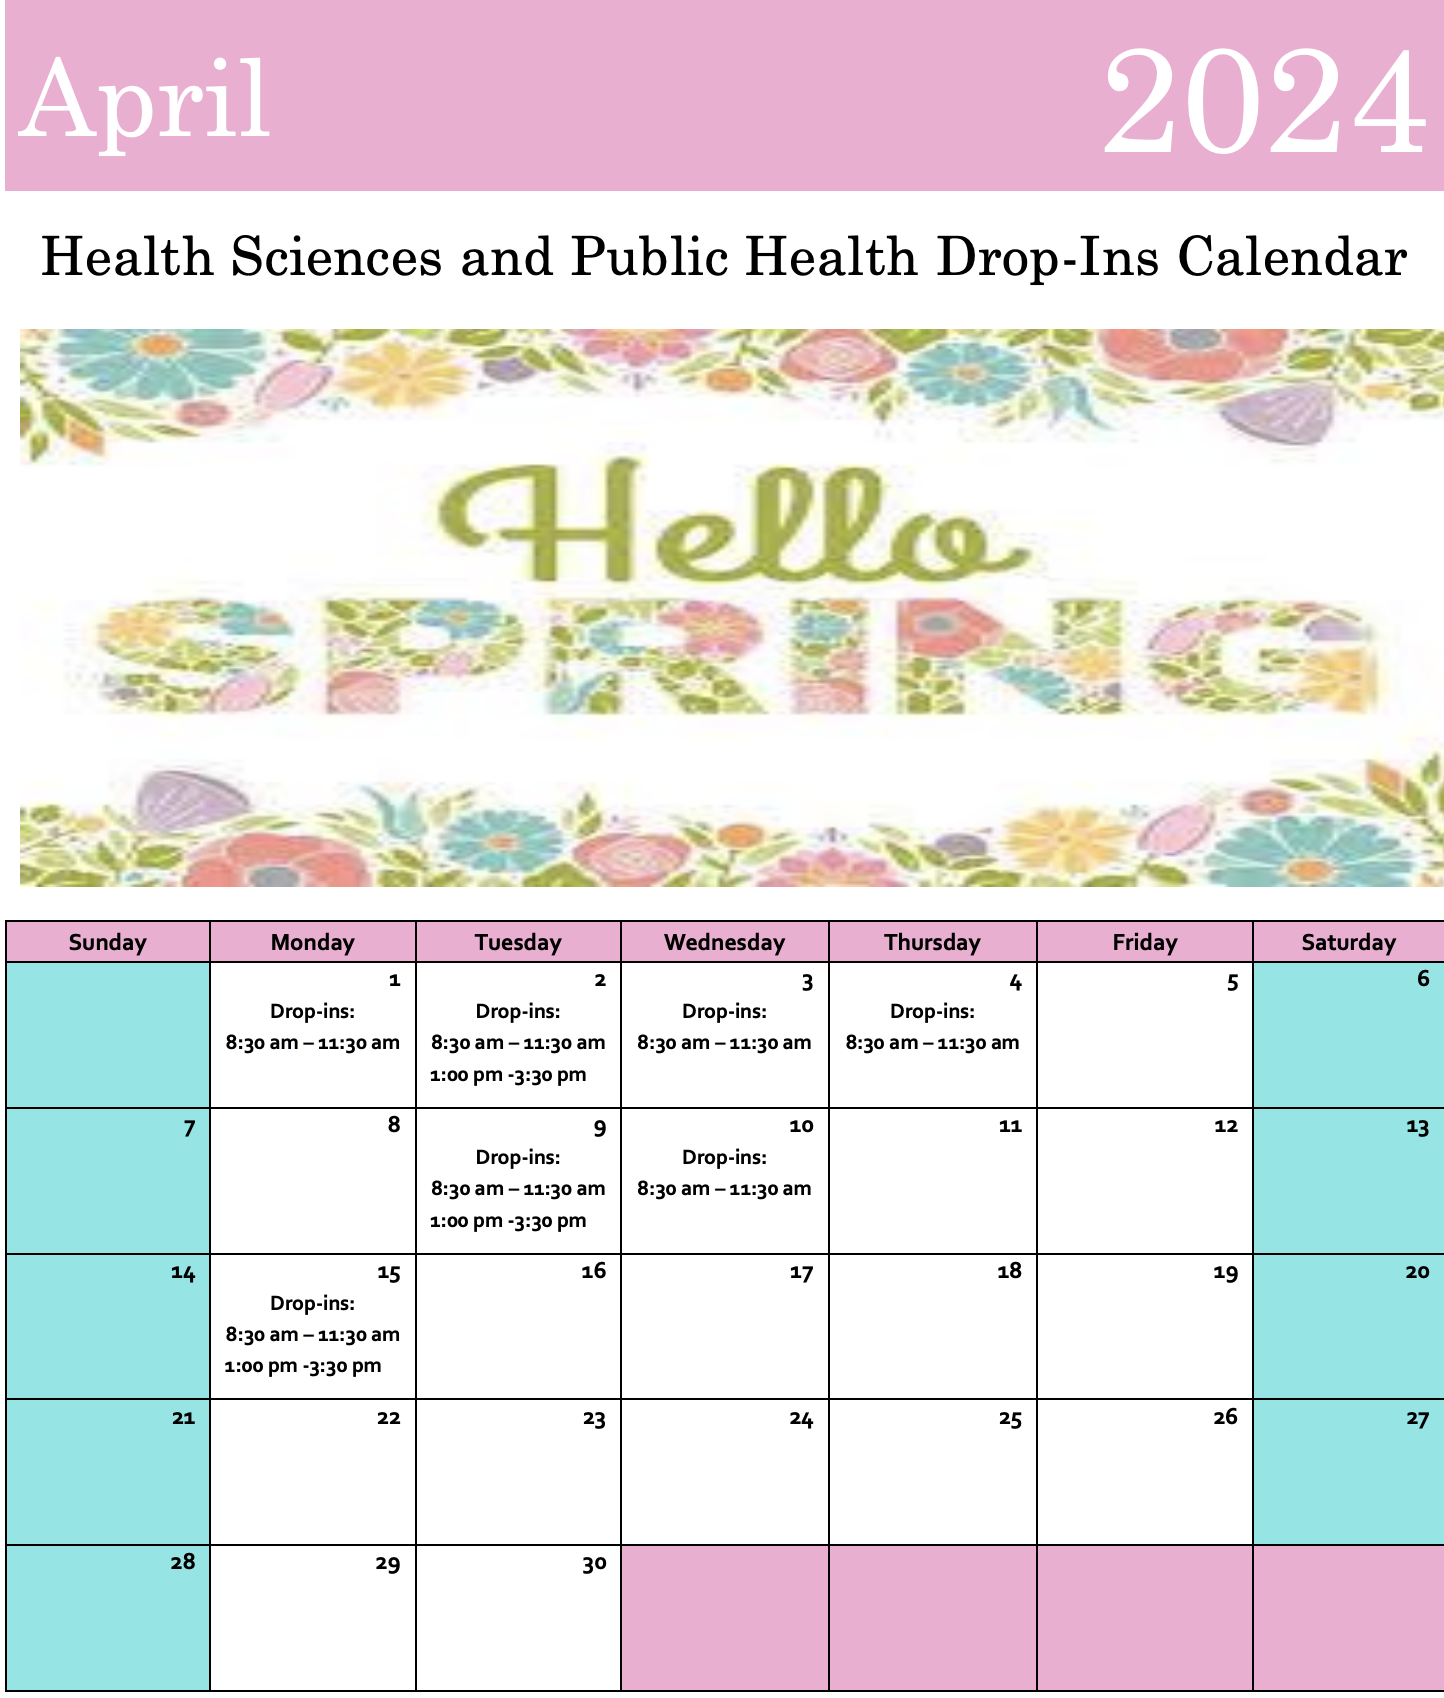 April Drop-In Calendar with availability on April 1, 2, 3, 4, 9, 10, and 15 from 8:30 a.m. to 11:30 a.m. and April 2, 9, and 15 from 1:00 p.m. to 3:30 p.m.